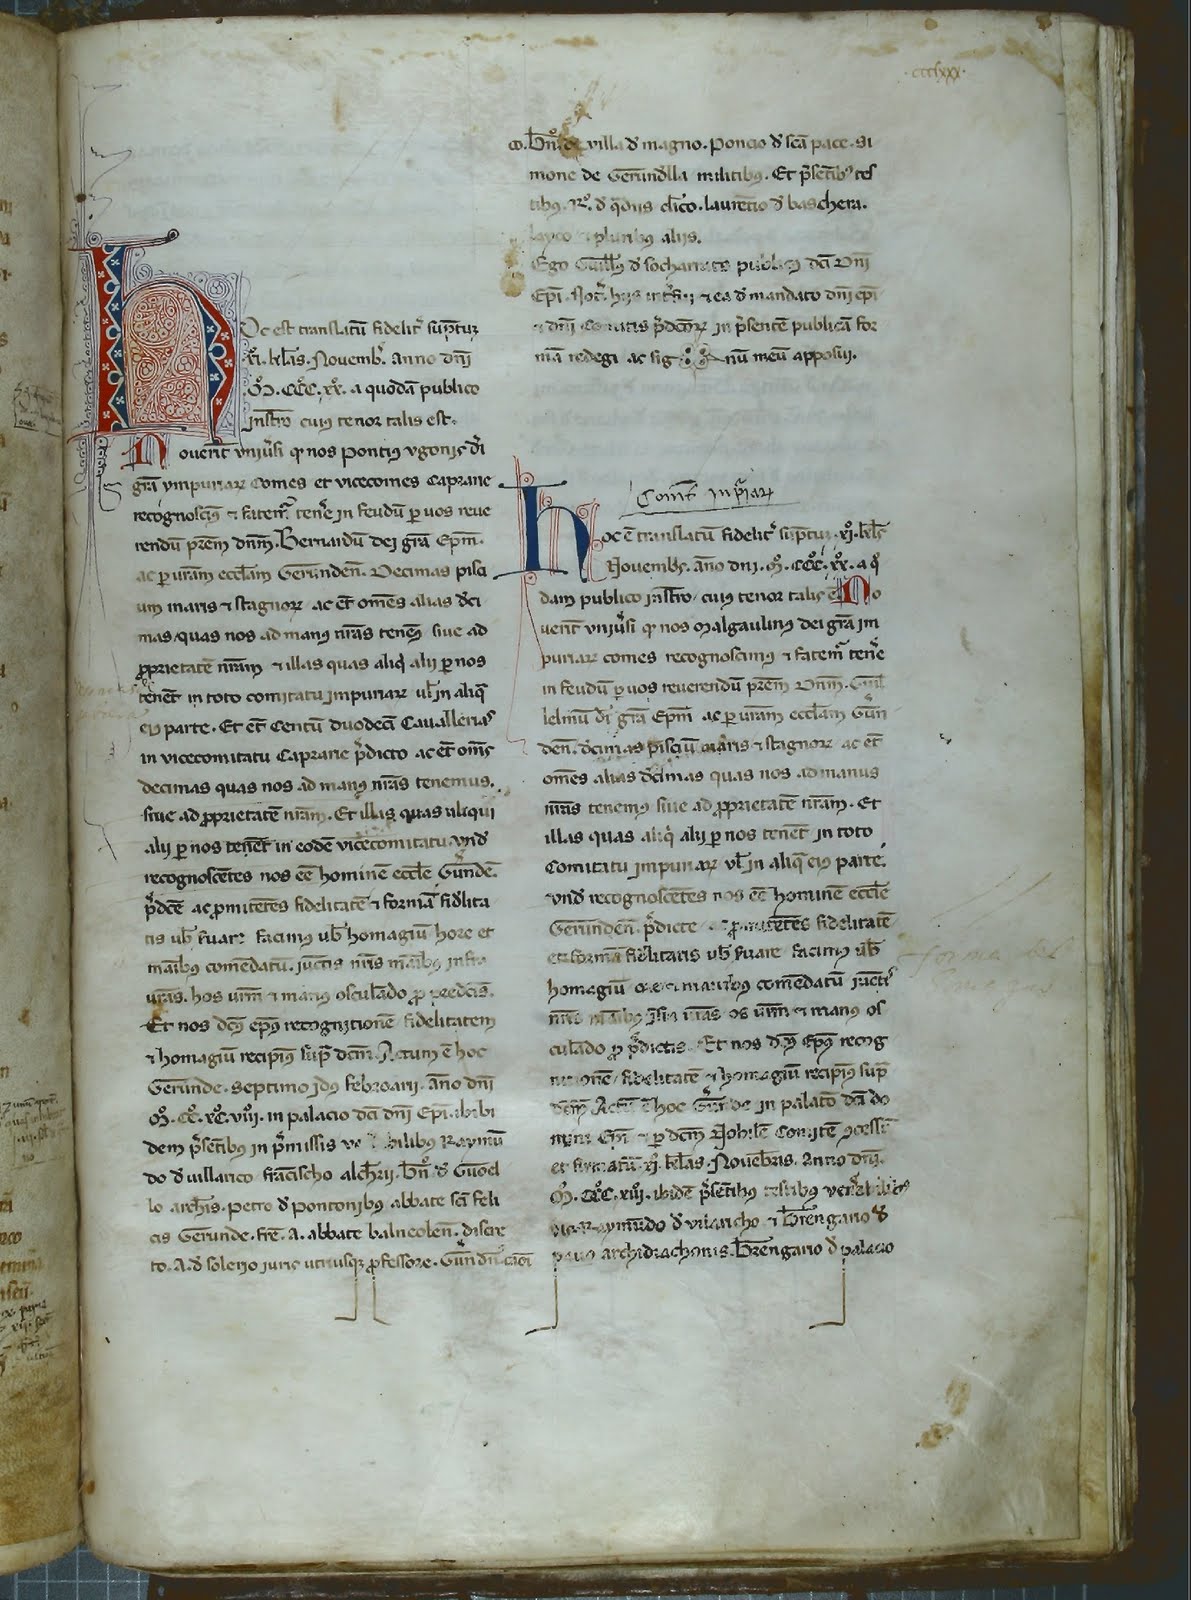 A page from the Cartoral de Carlemany of the Arxiu Diocesà de Girona